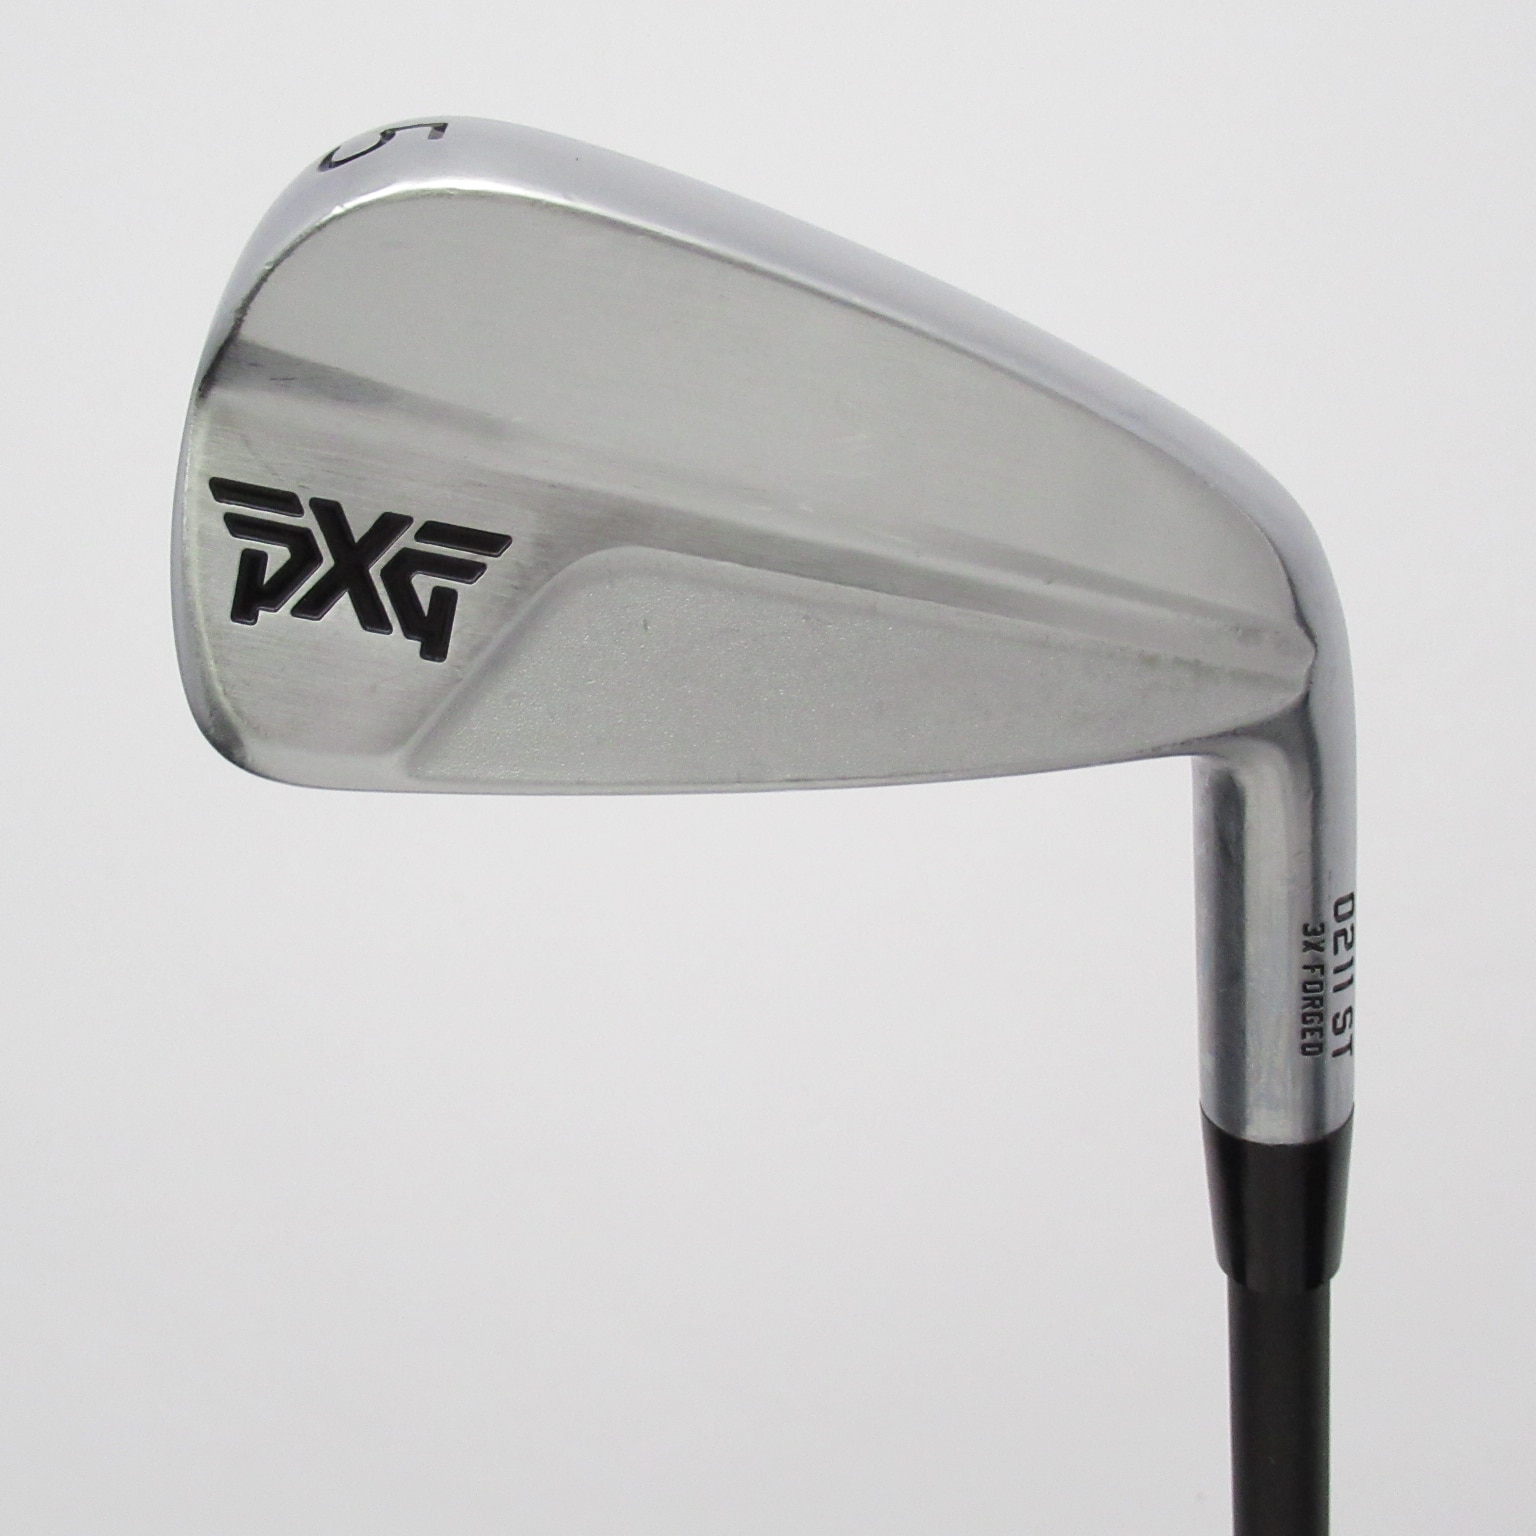 PXG 0211 ST 中古アイアンセット ピーエックスジー PXG メンズ 通販